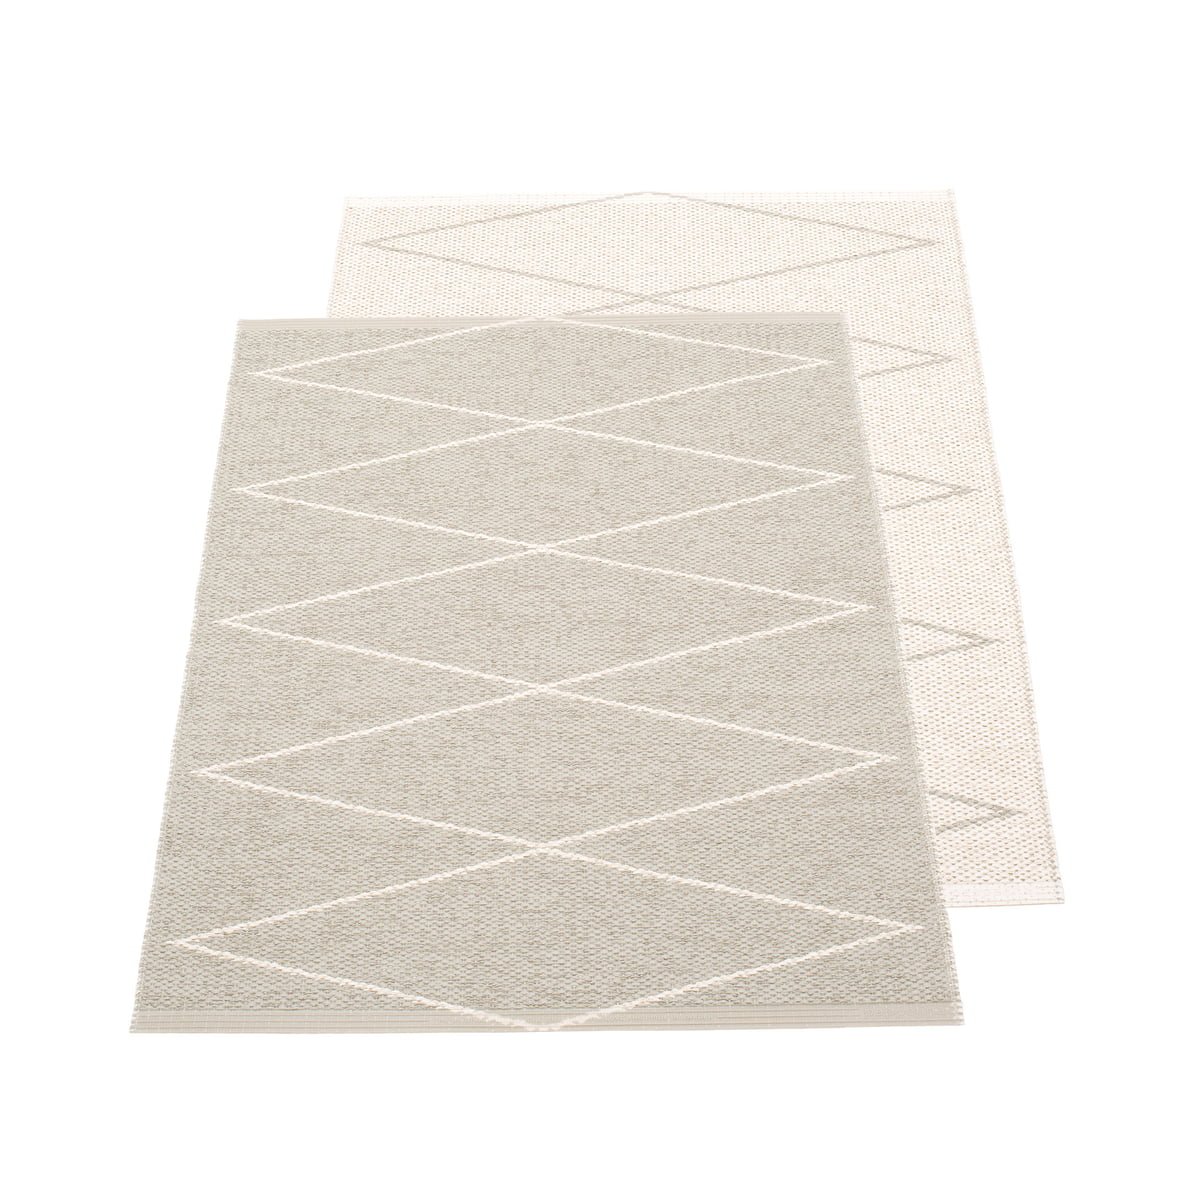 Pappelina Rug for indoor or outdoor use, reversible, machine